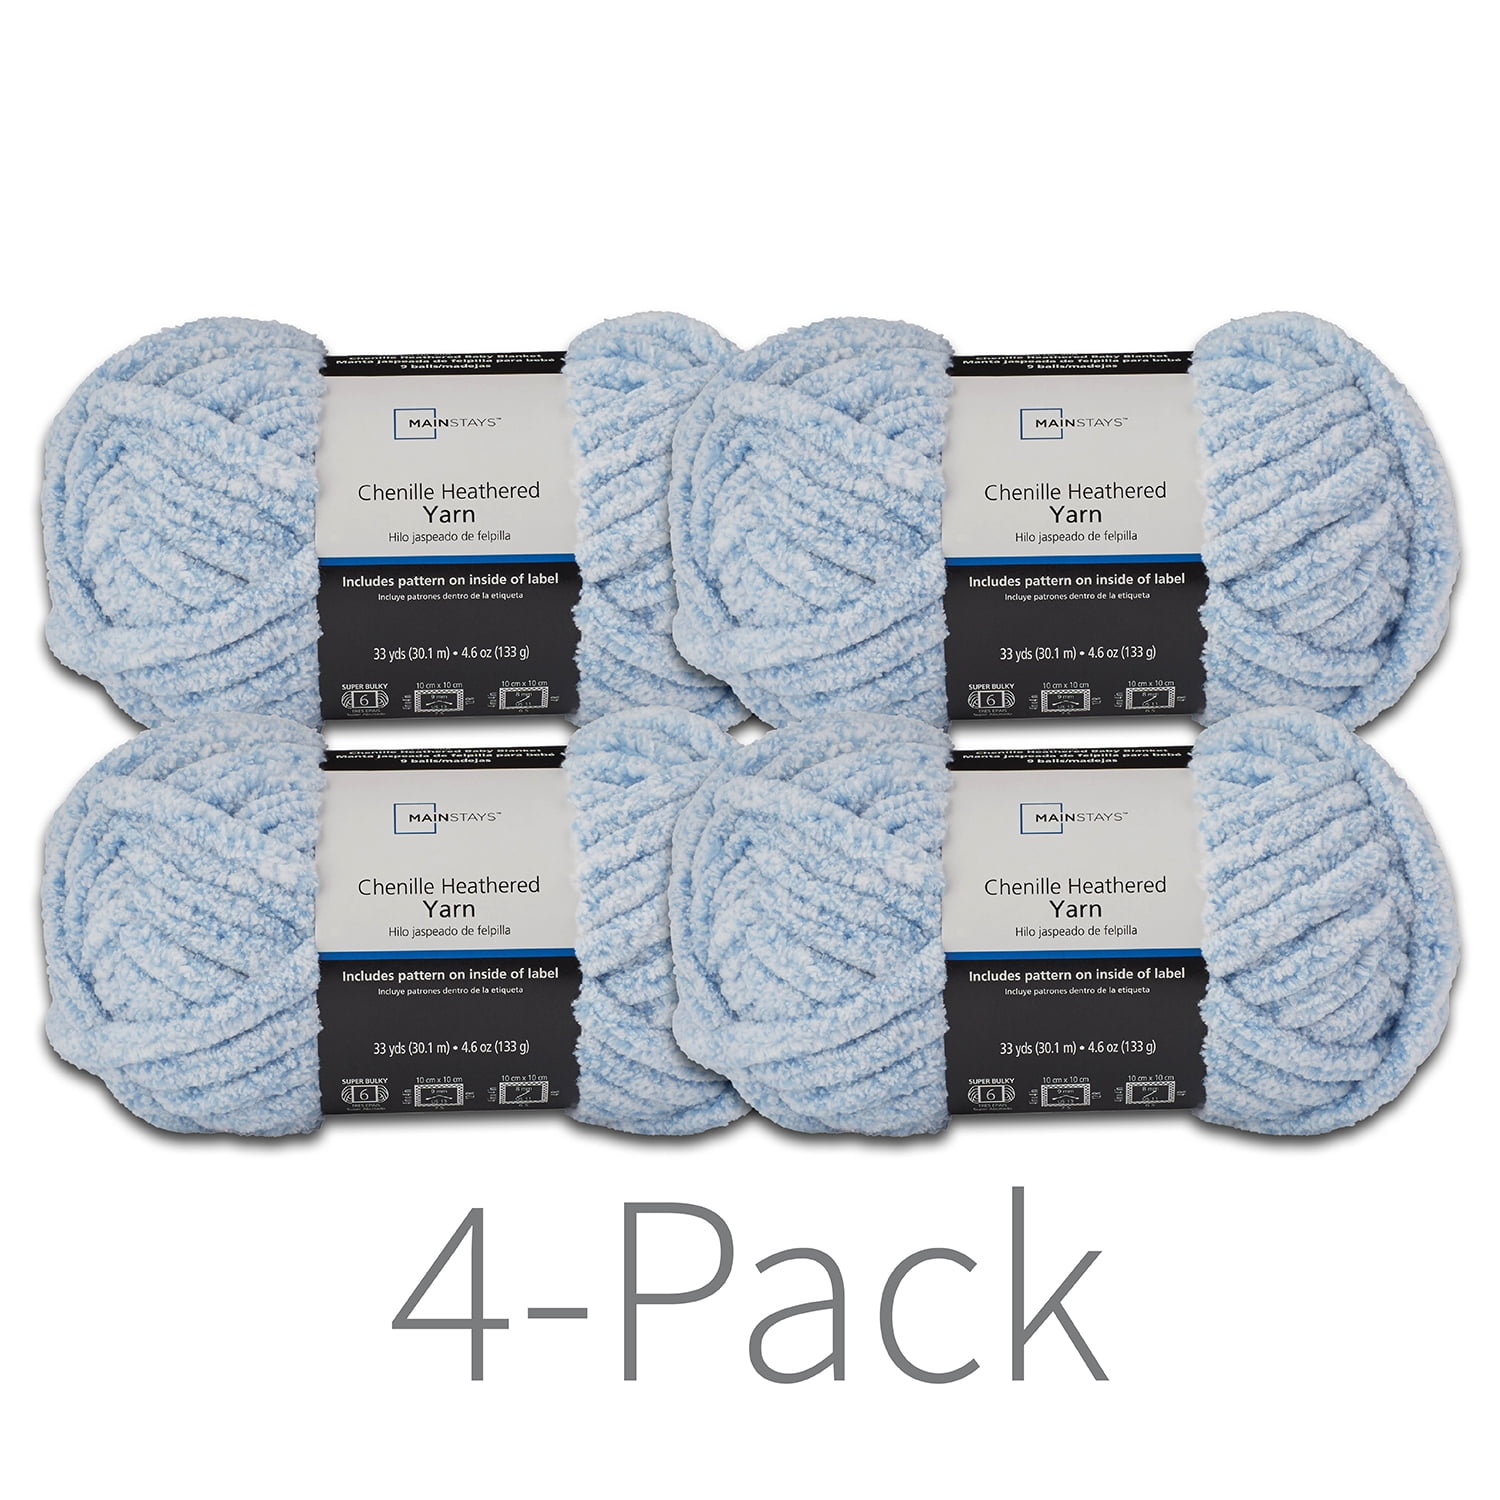 Mainstays Chenille Heathered Yarn, 33 yd, Blue Shell, Super Bulky, Pack of 4